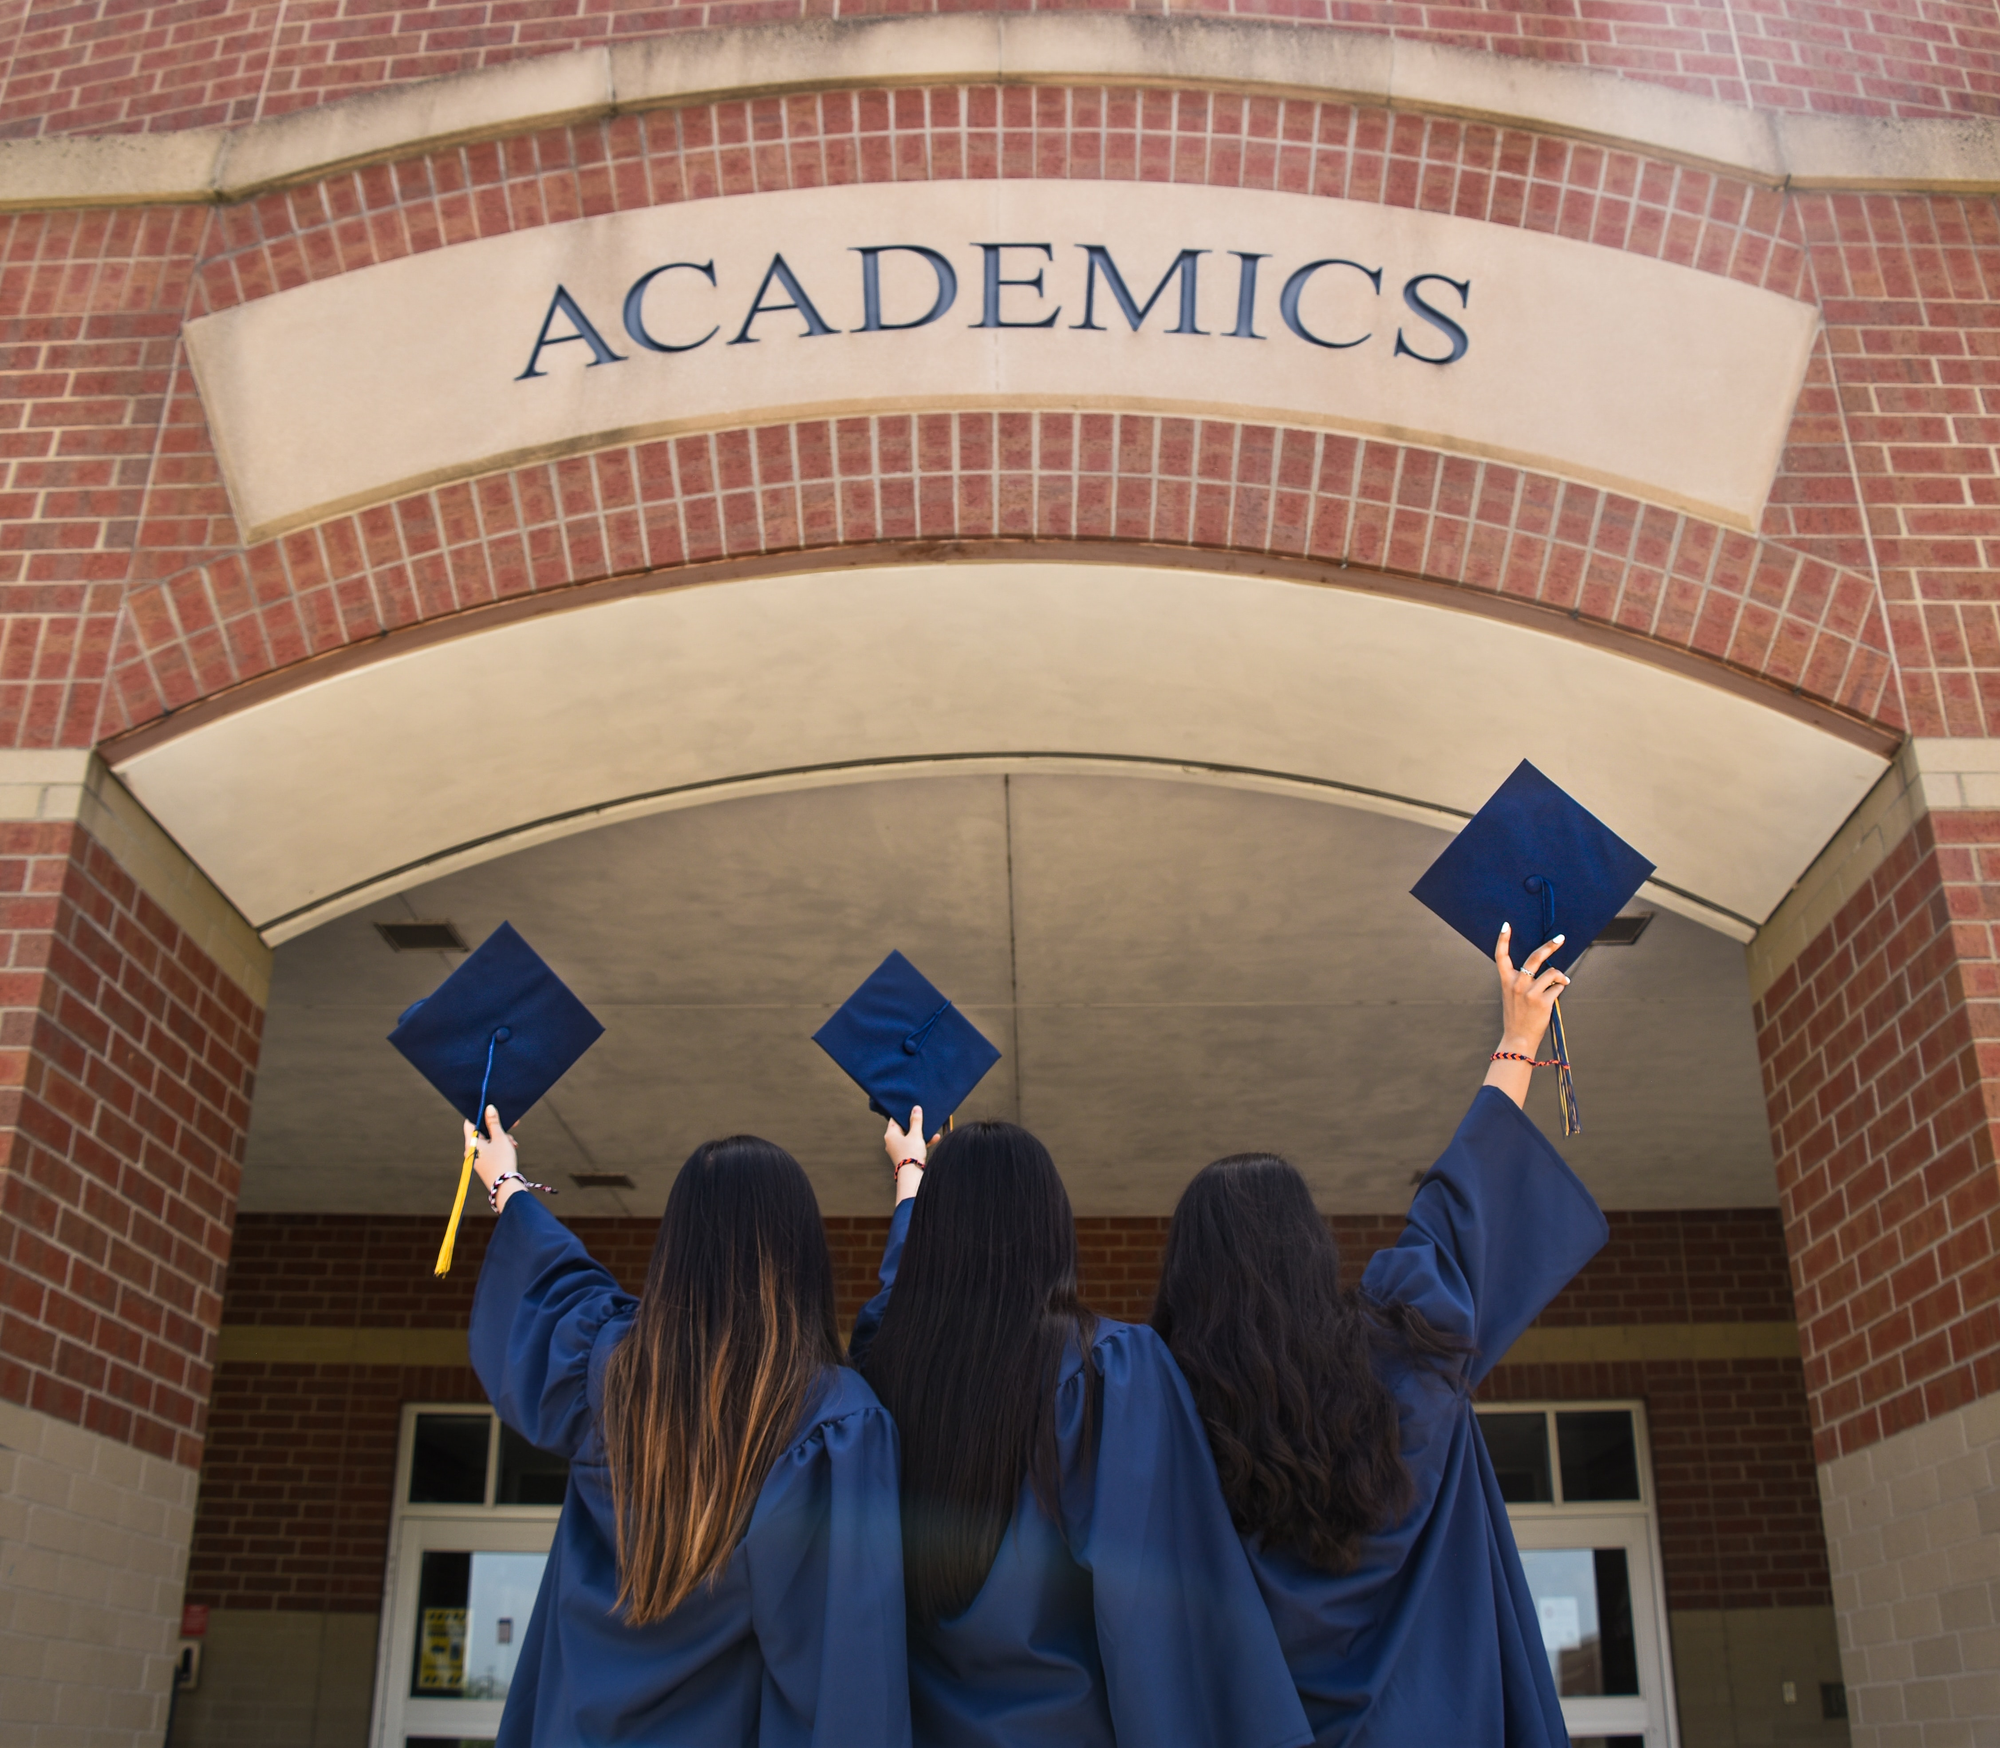 Three university students, in graduation gowns, holding their caps up and facing an academic building.